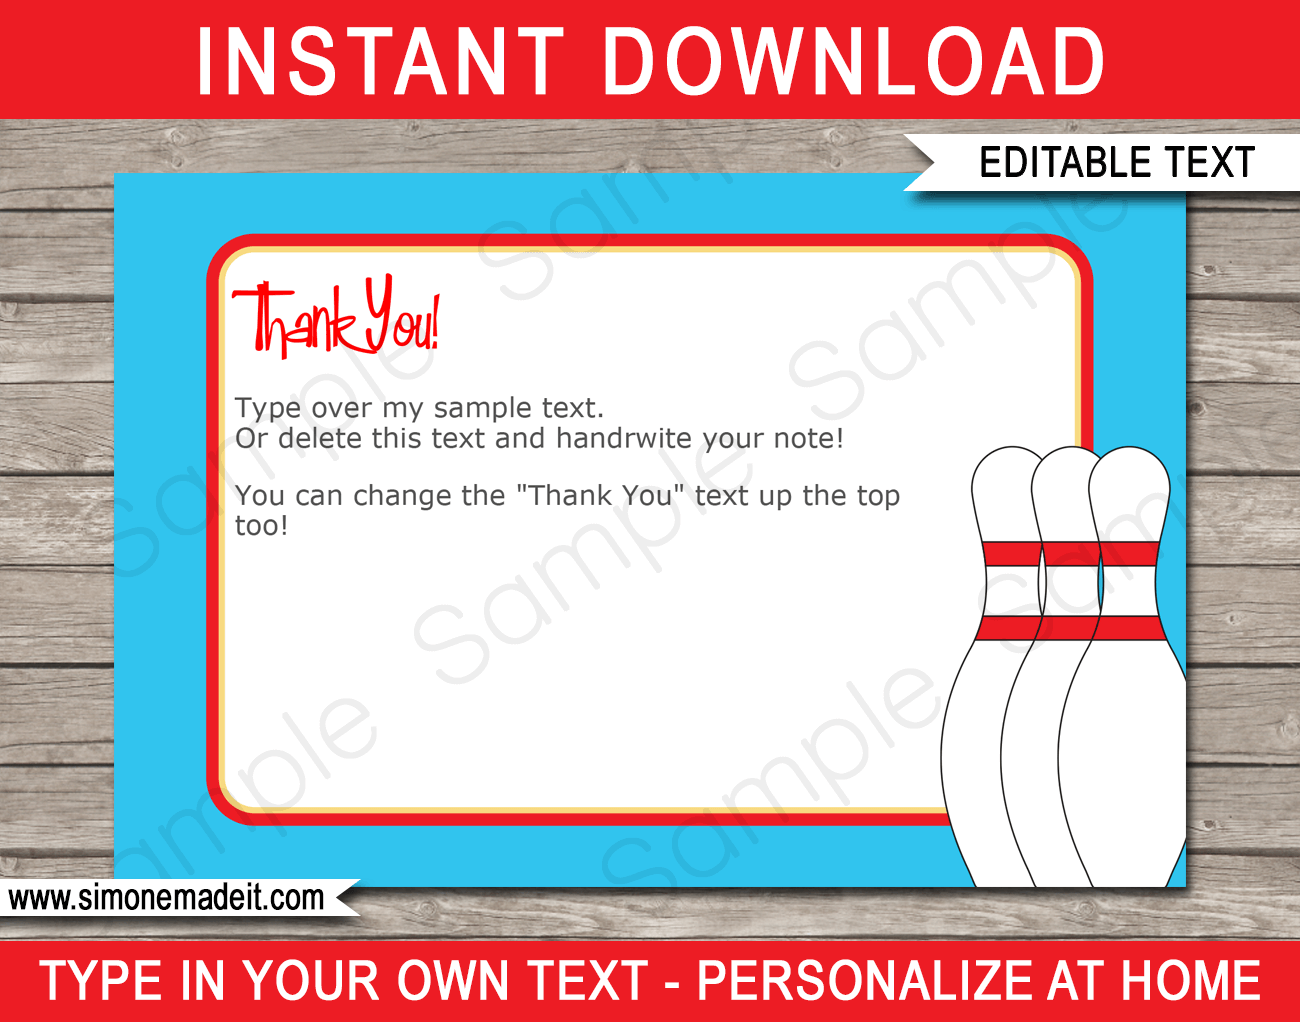 Printable Bowling Party Thank You Cards - Favor Tags - Bowling Birthday Party theme - Ten Pin Bowling Party - Editable Template - Instant Download via simonemadeit.com